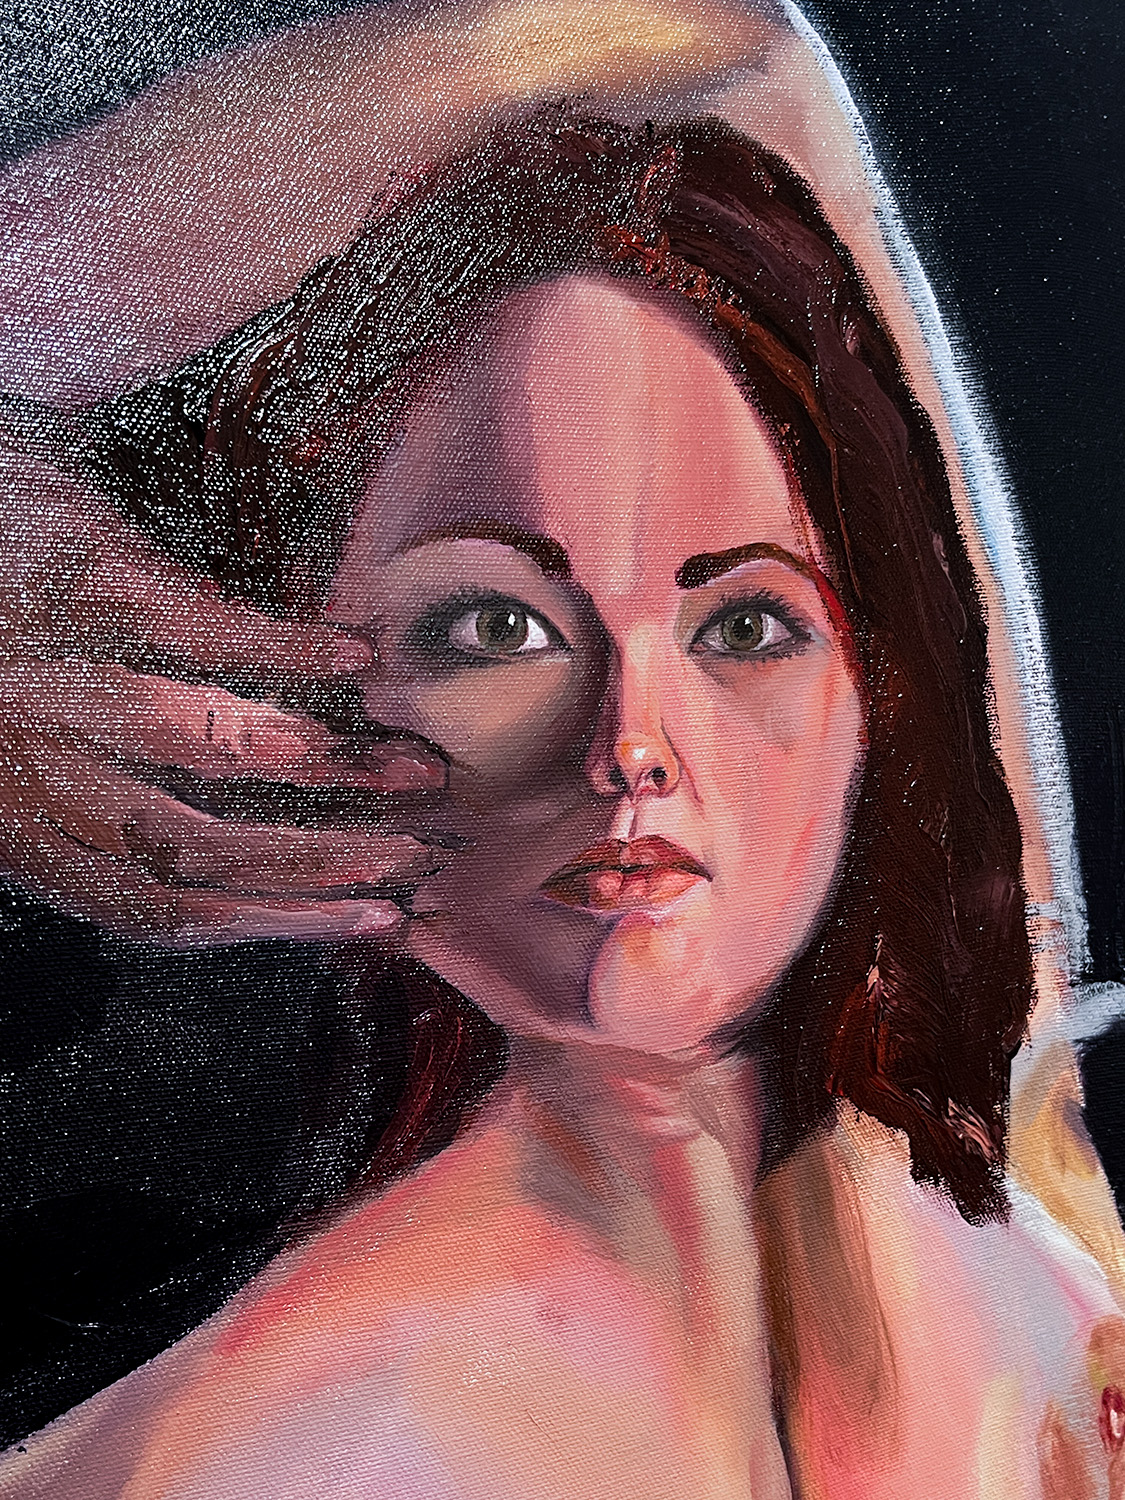 detail of painting - woman's face with hand by it